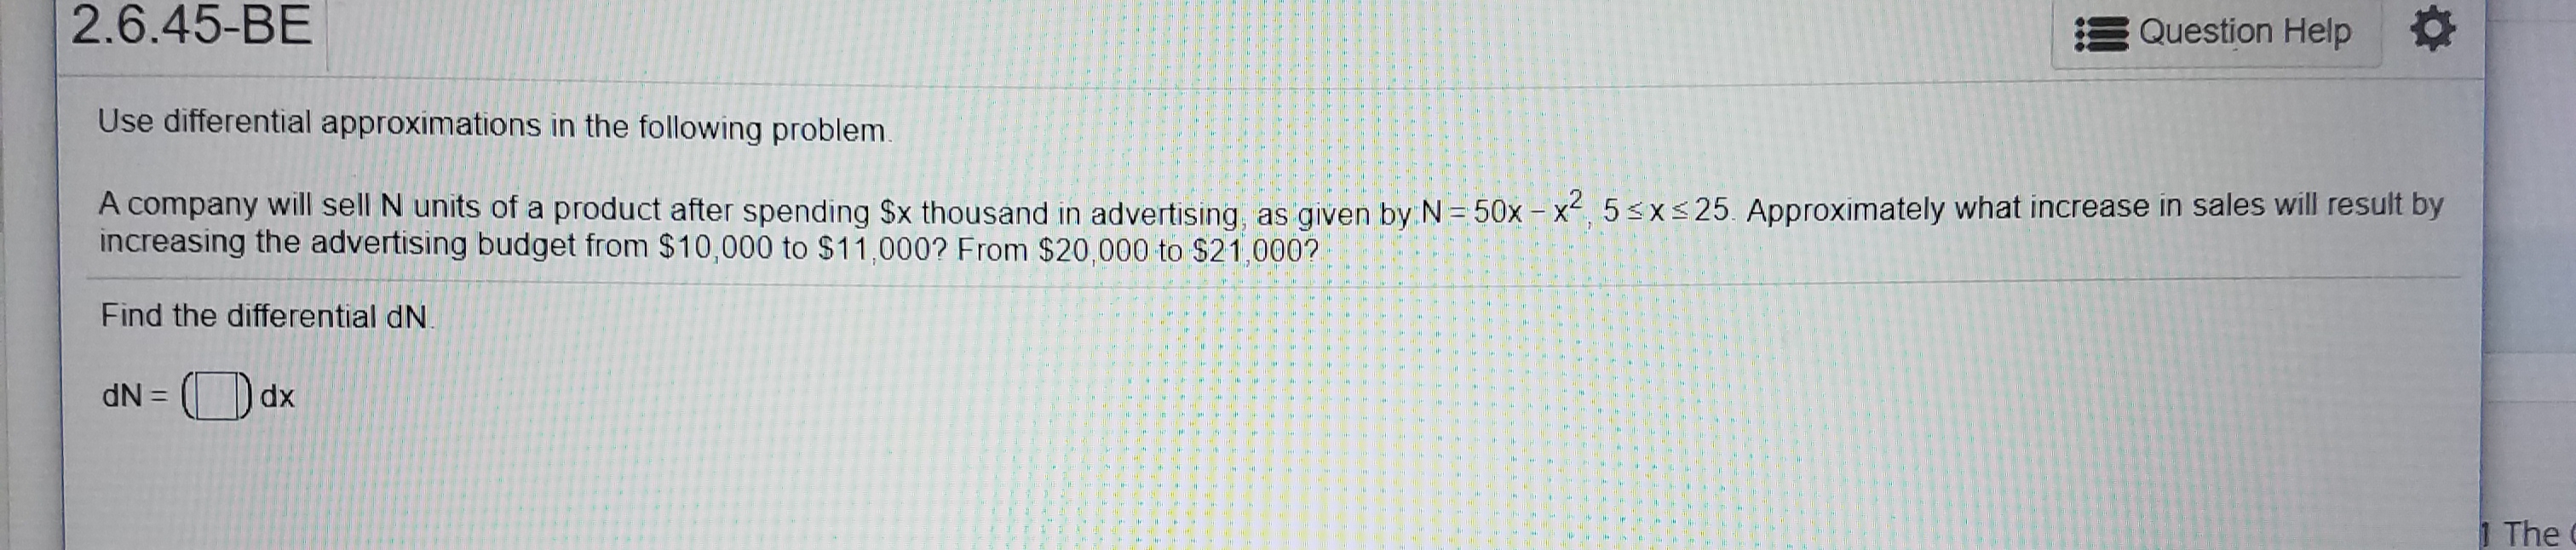 2.6.45-BE
Question Help
Use differential approximations in the following problem.
A company will sell N units of a product after spending $x thousand in advertising, as given by N = 50x- x2, 5sxs25. Approximately what increase in sales will result by
increasing the advertising budget from $10,000 to $11,000? From $20,000 to $21,000?
Find the differential dN
dx
dN=
1 The
